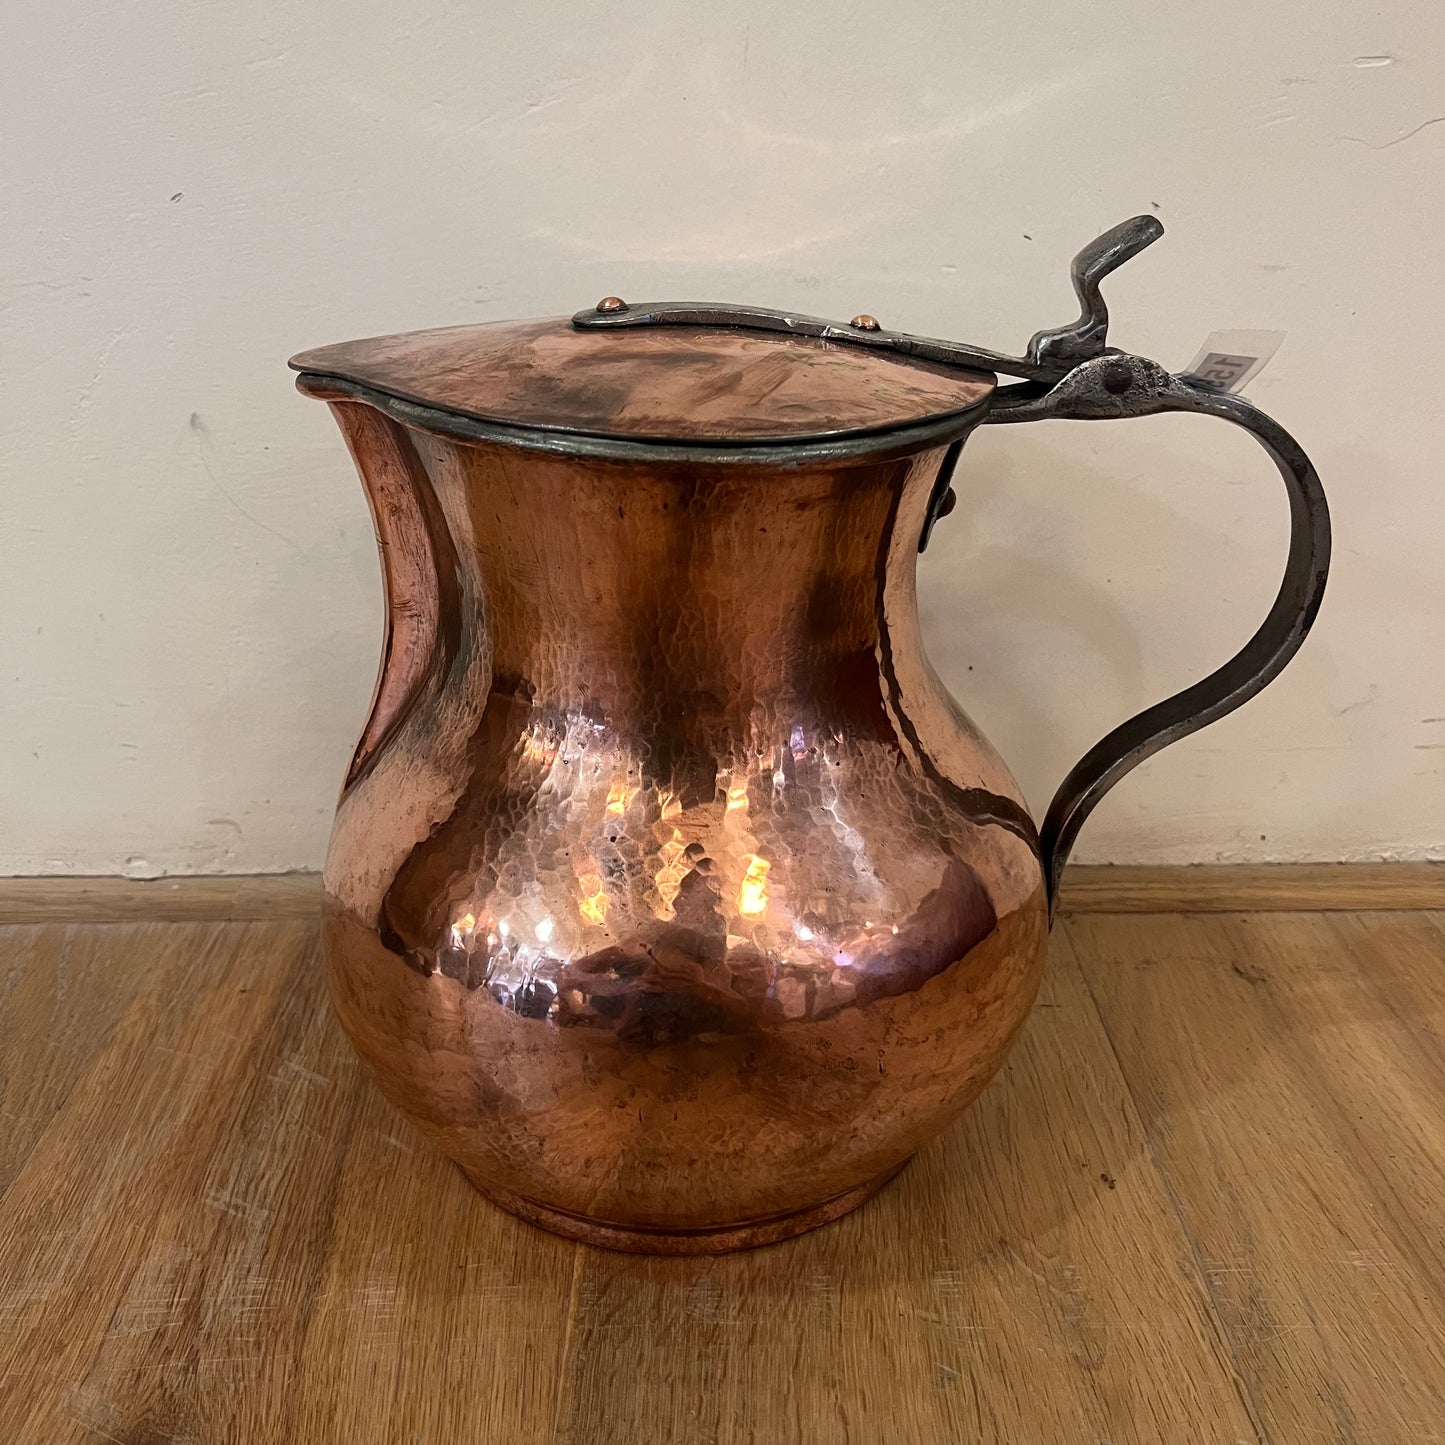 Antique French Hammered Copper Pitcher with Lid